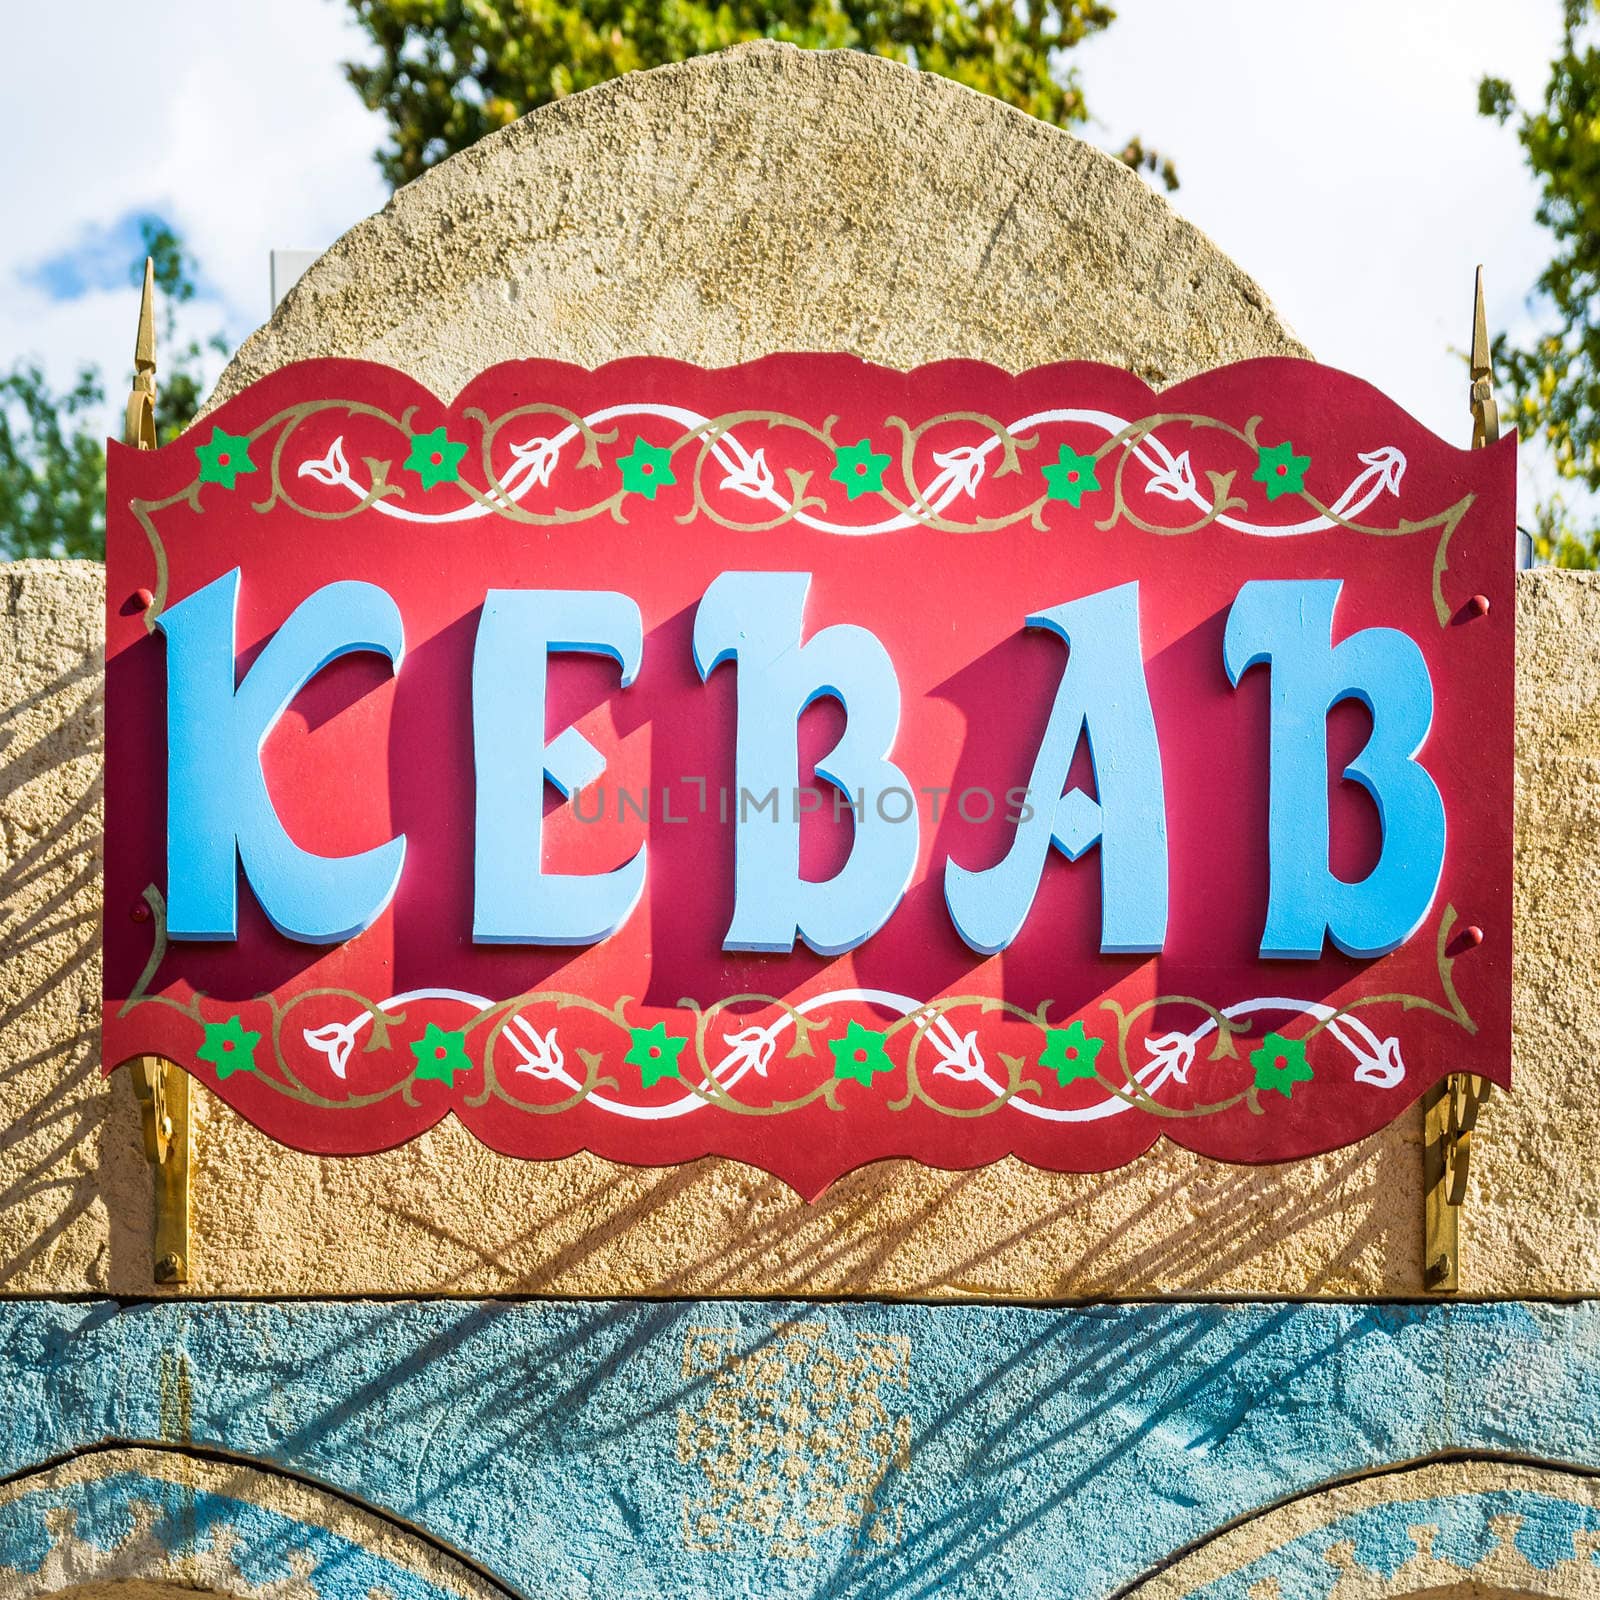 Sign decorated with raised letters that form the word "kebab". by Isaac74